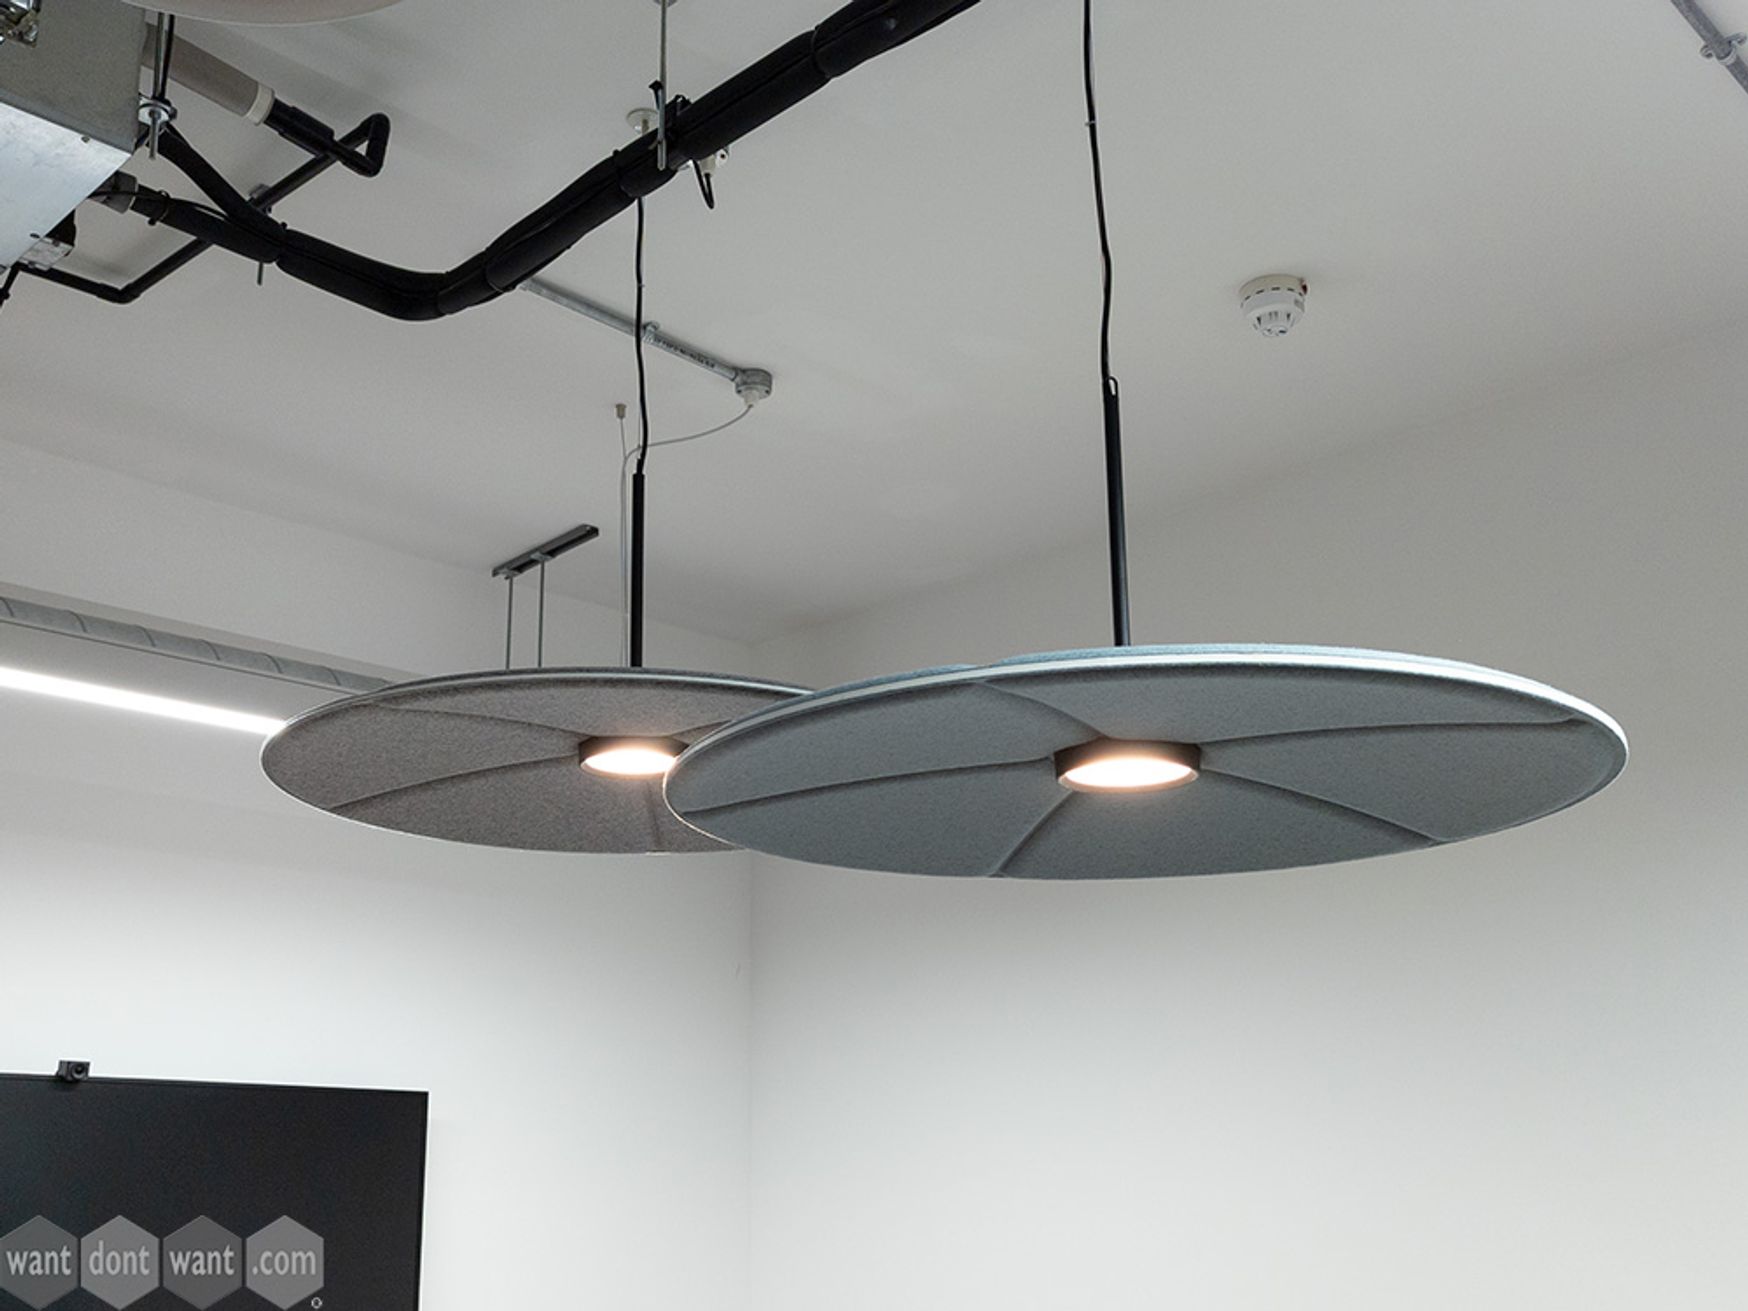 Used Abstracta 'Lily' acoustic light absorber with light - 2 colours. Each cost over £1100 new!